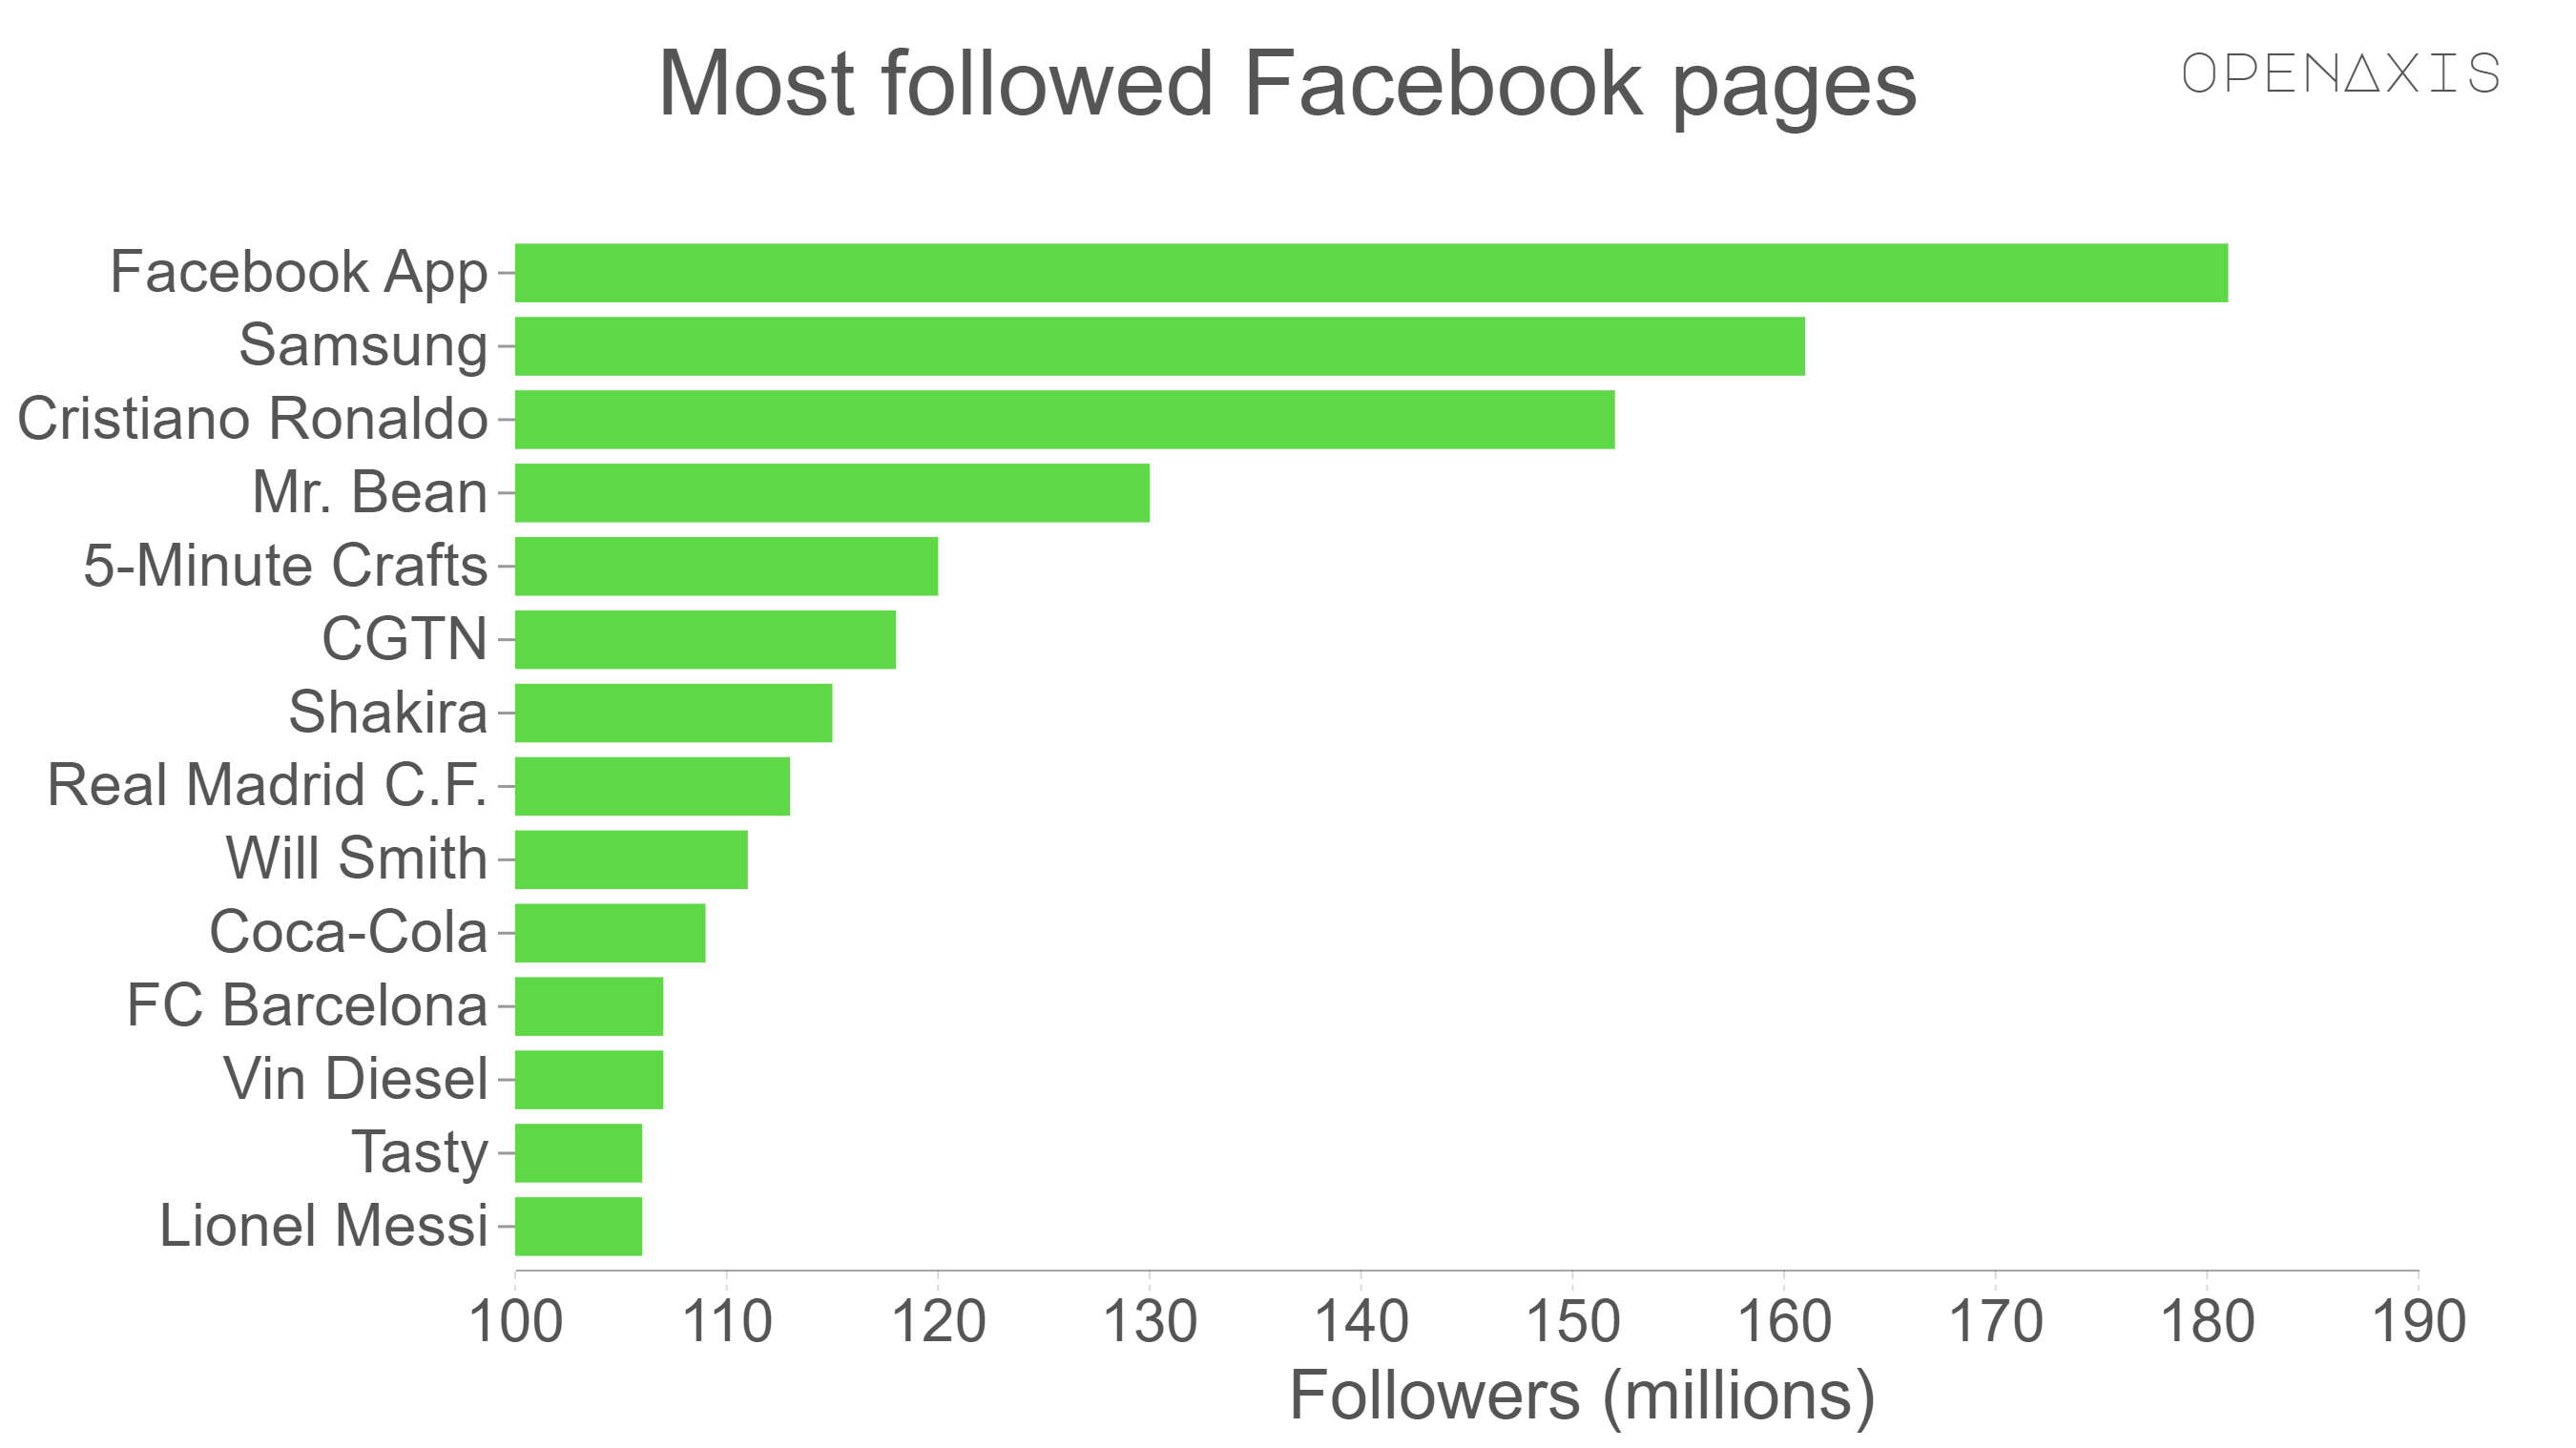 "Most followed Facebook pages"